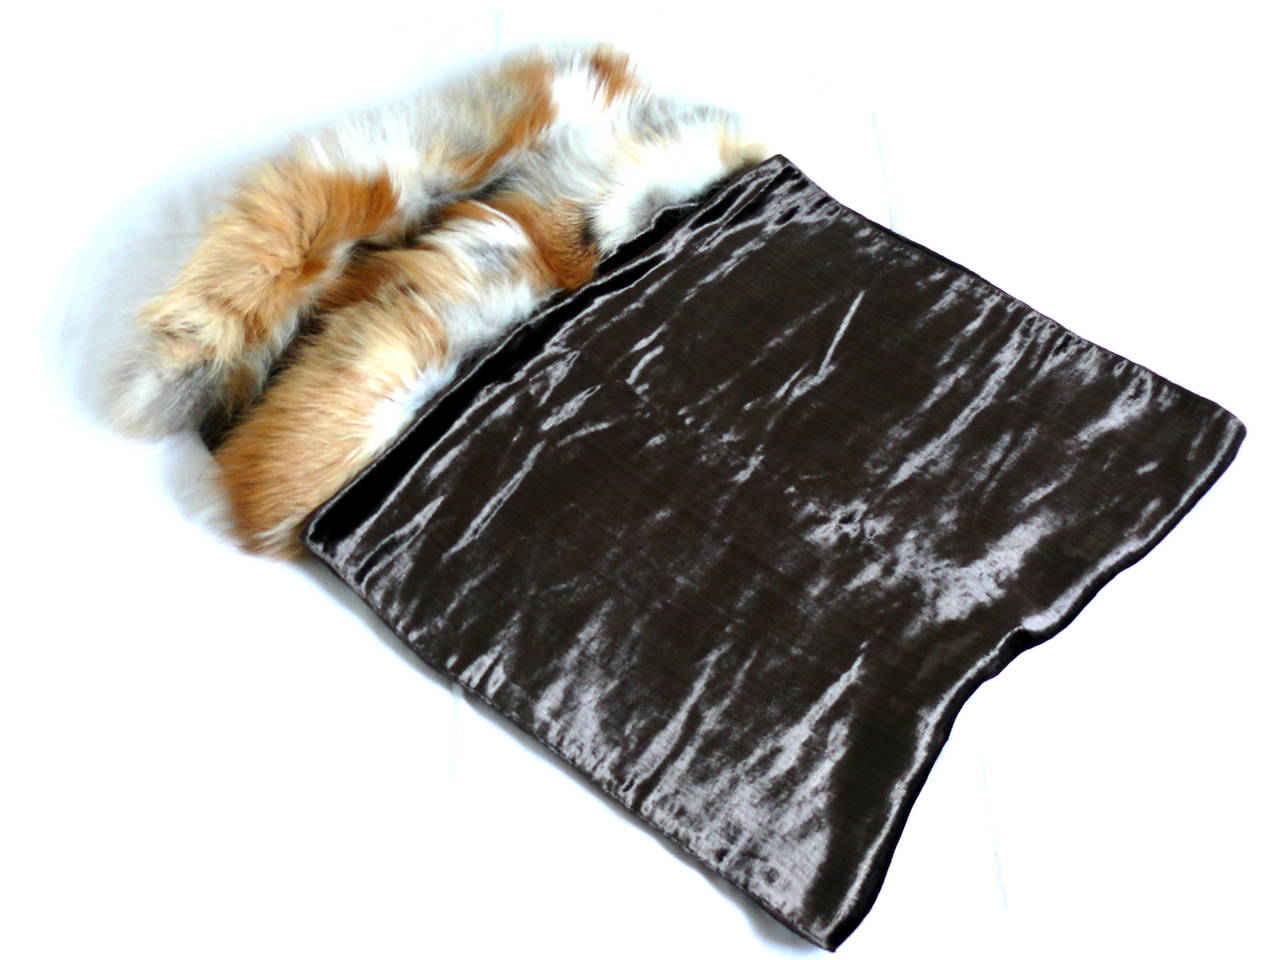 CHRISTIAN DIOR gorgeous stole featuring fur on both sides.

Label reads CHRISTIAN DIOR Paris.

Composition tag reads : 60% viscose / 30 % polyester / 10 % silk.

Indicative measurements : length approx. 210 cm (82.68 inches) / width approx. 54